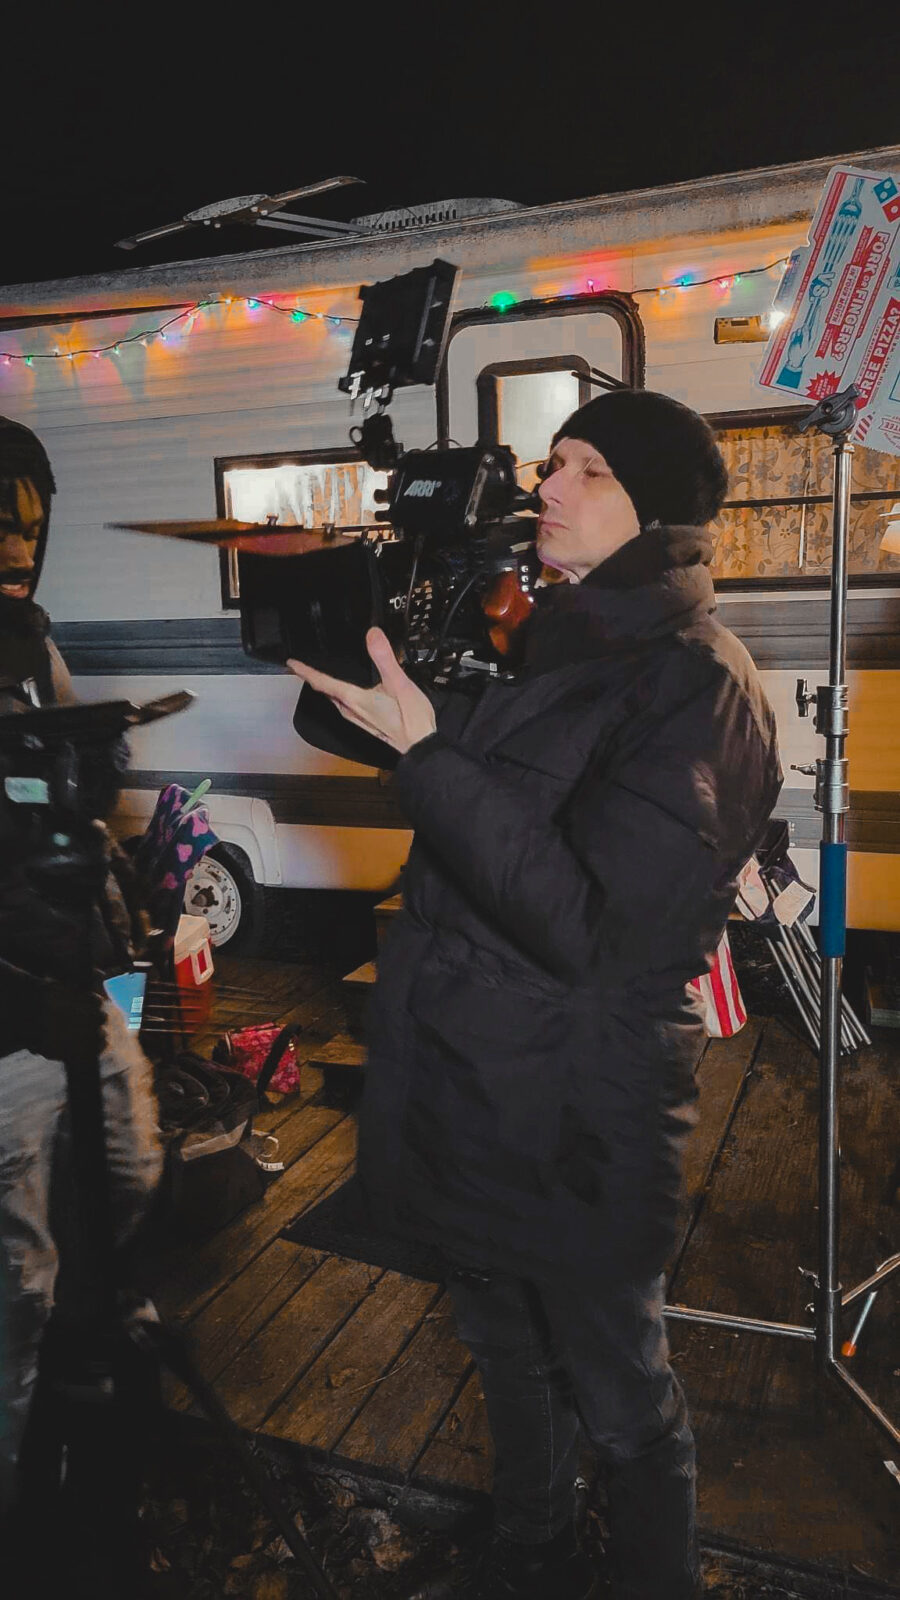 Behind the scenes frame from sci-fi comedy film 'Burger Snap' by Director of Photography - Jason Kraynek.